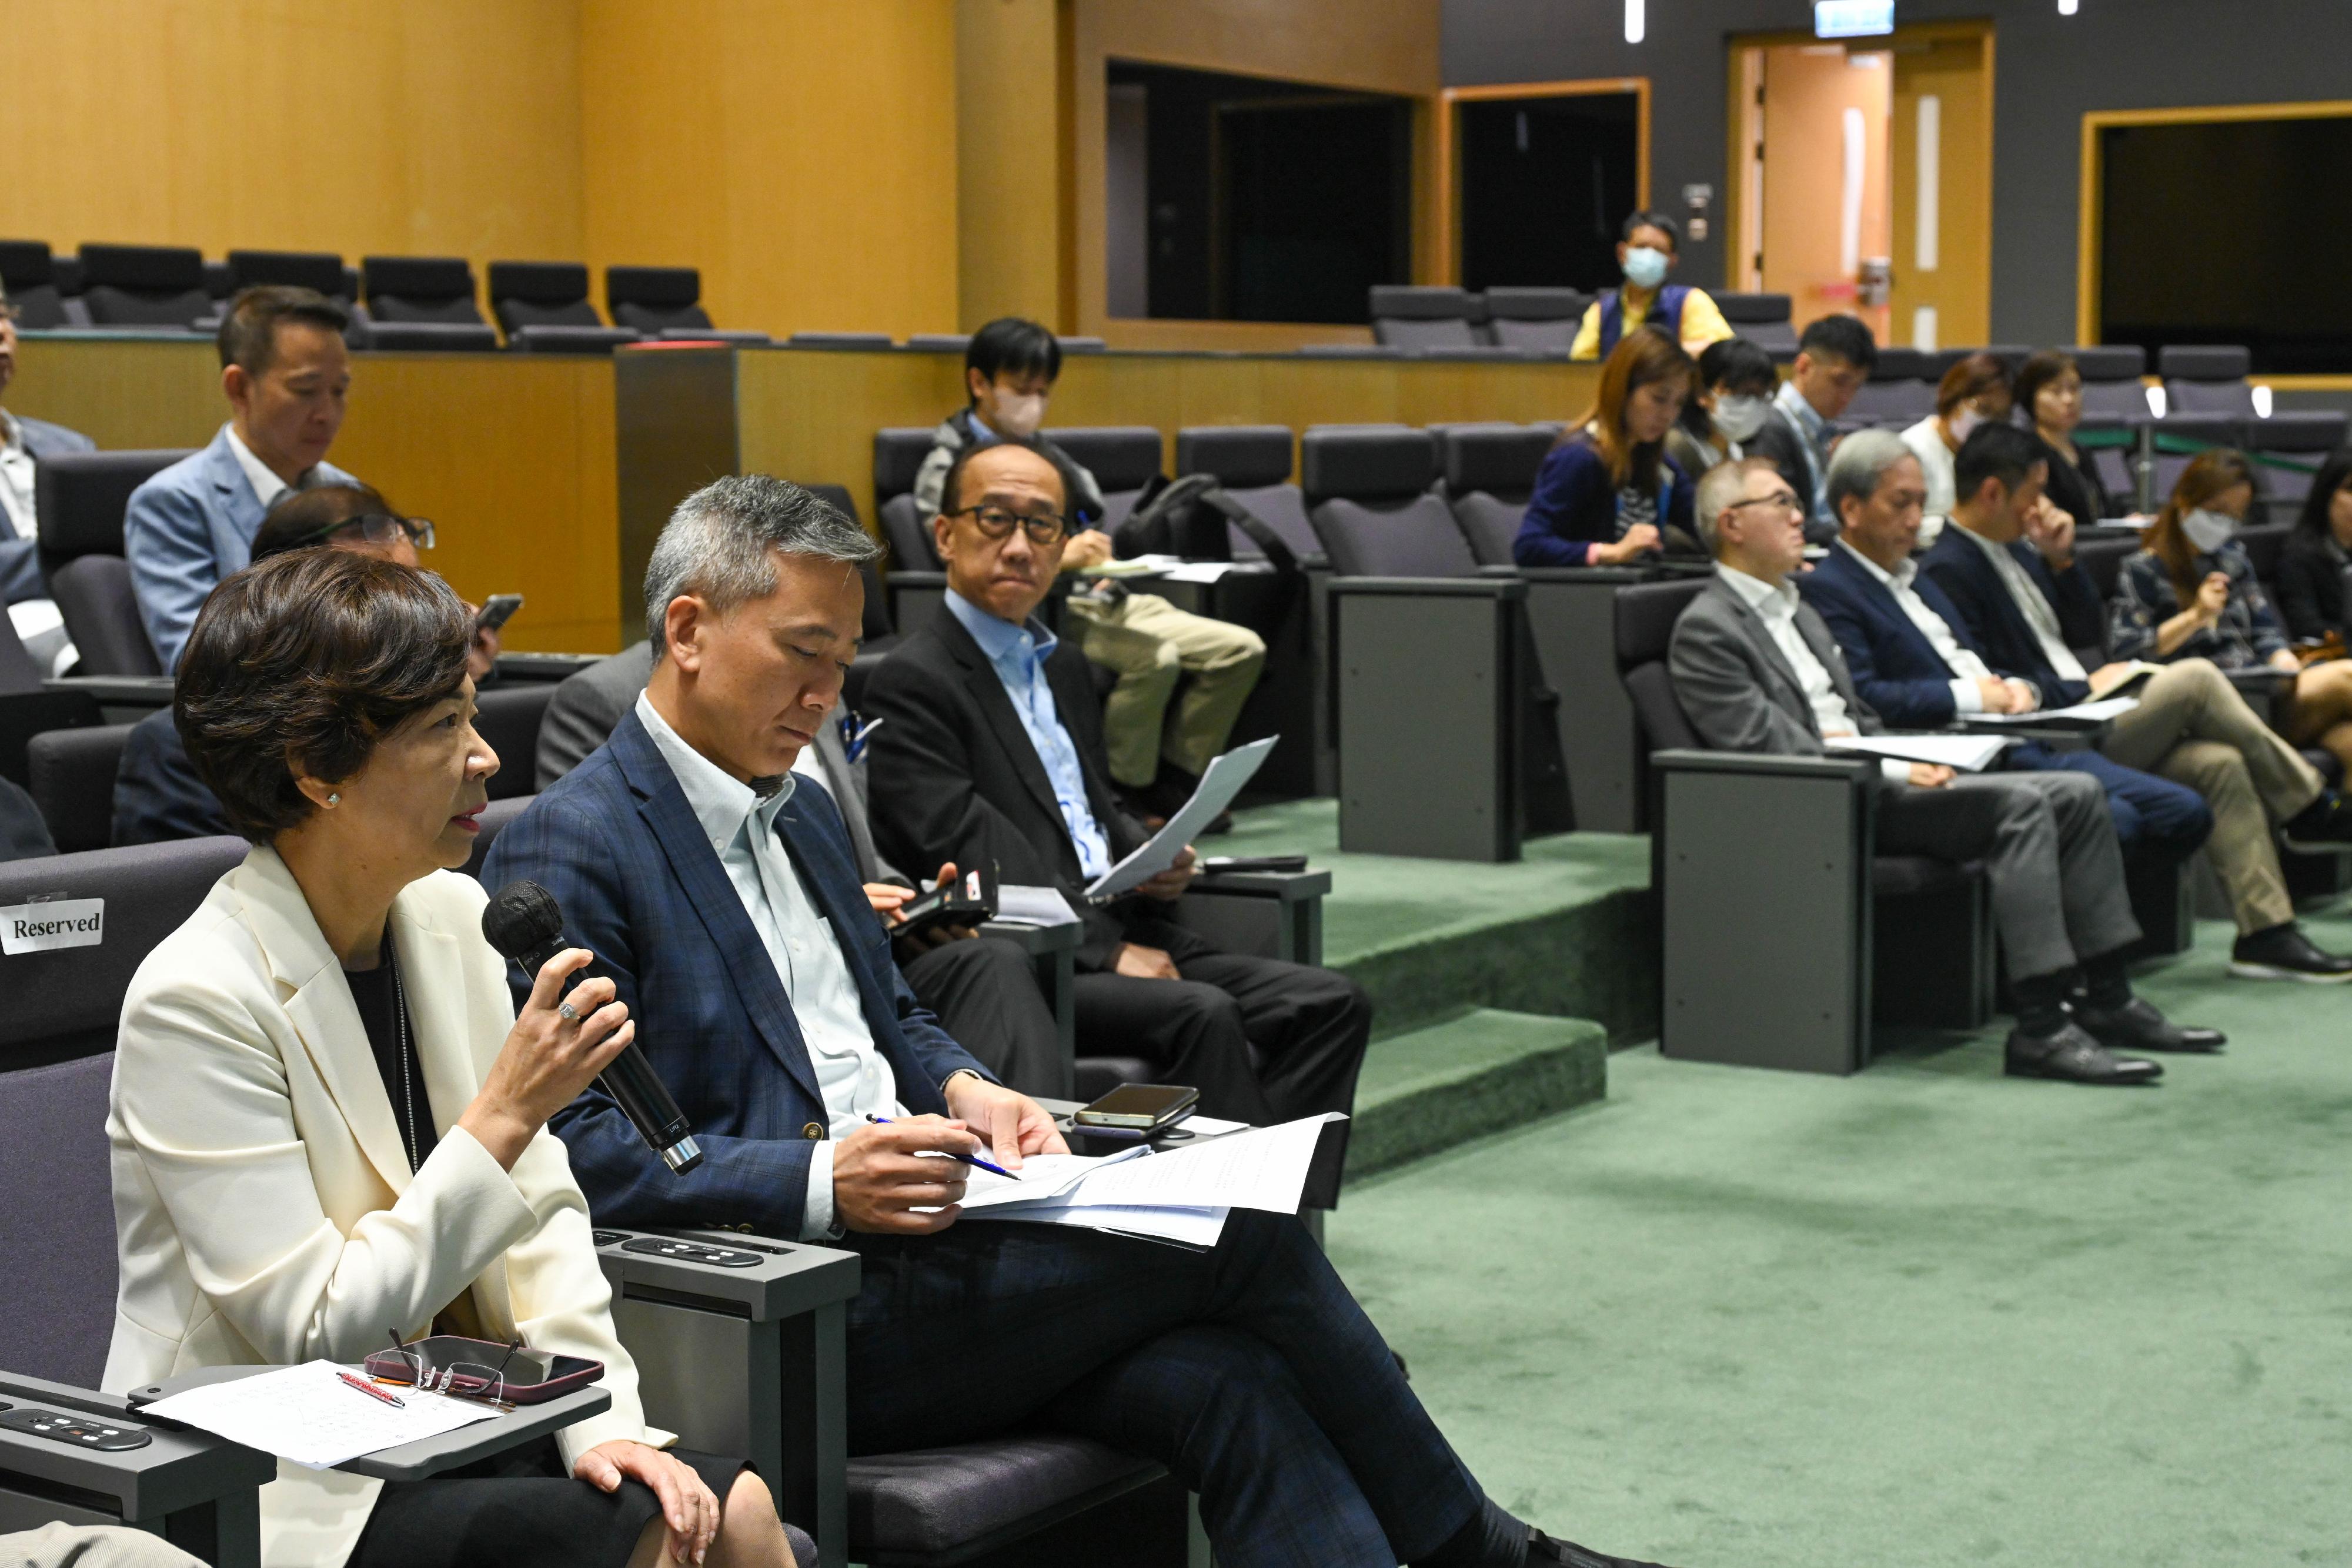 The Tourism Commission of the Culture, Sports and Tourism Bureau held a consultation session on the formulation of the Development Blueprint for Hong Kong's Tourism Industry 2.0 in the Central Government Offices today (May 2) for trade representatives to express views.